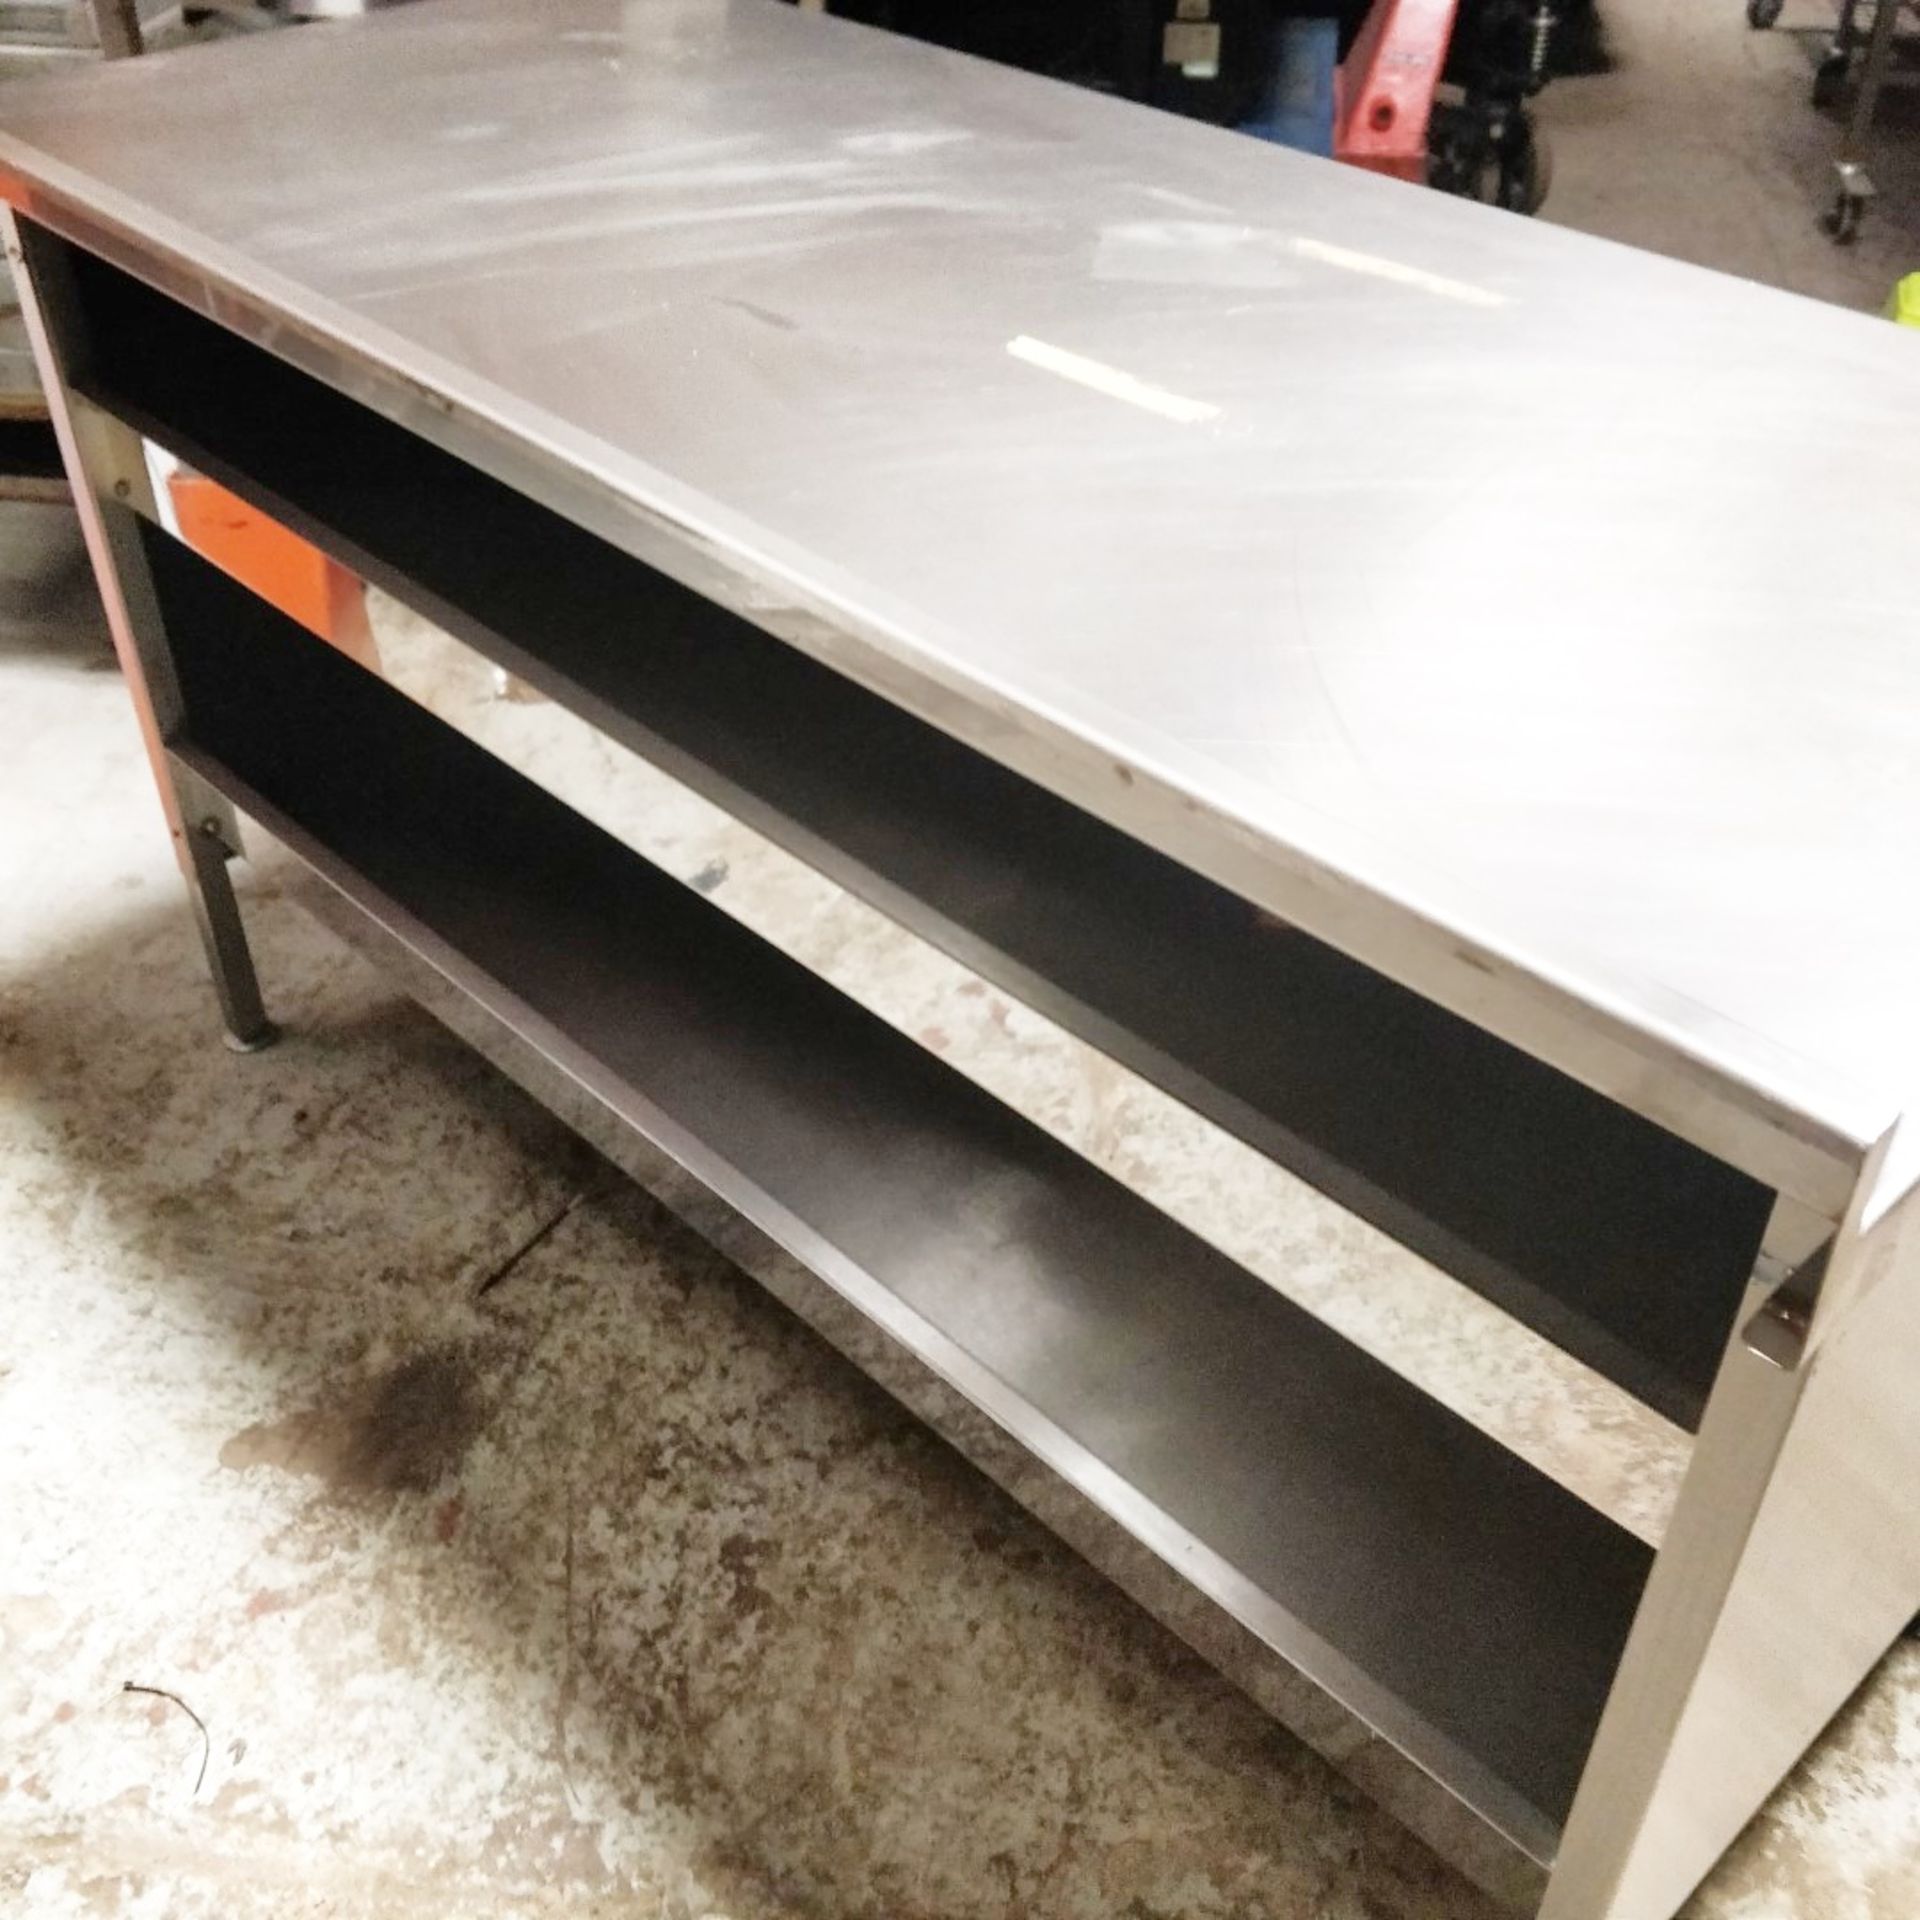 1 x Stainless Steel Commercial Kitchen Prep Counter With Upstand, Removable Front Ticket Holder - Image 6 of 10